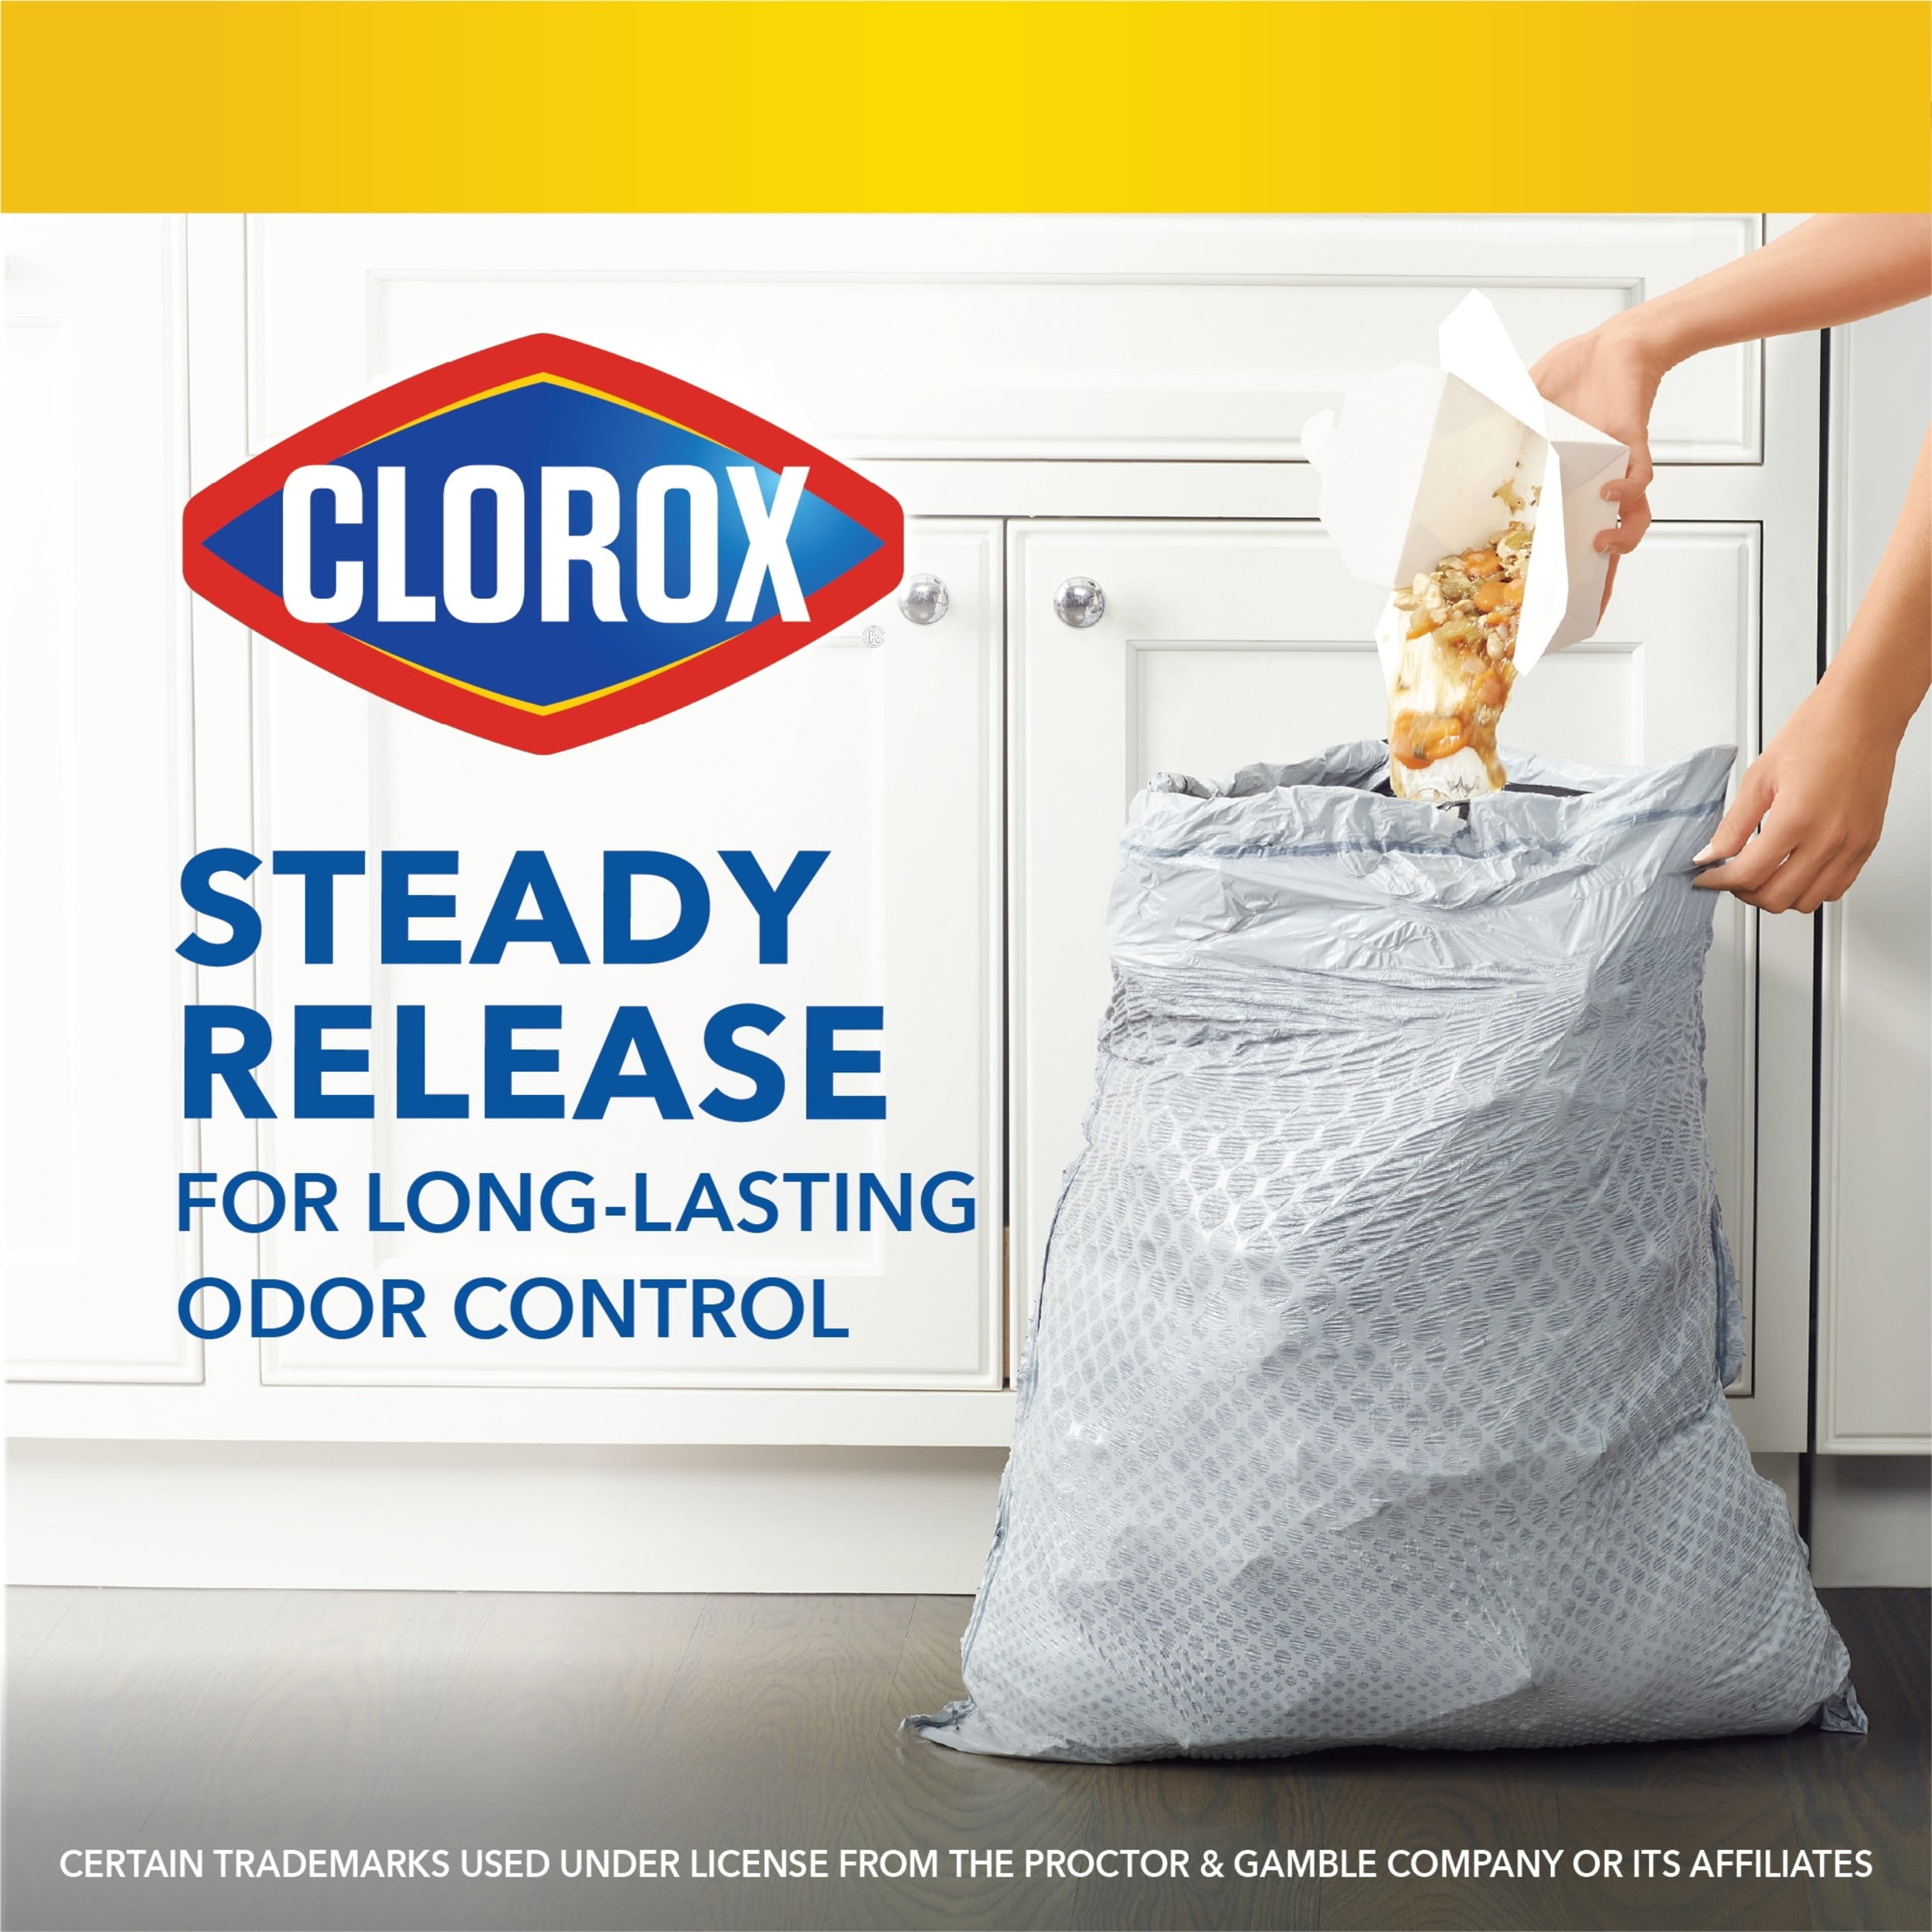 Glad® x Home Depot Fresh Clean Scented ForceFlex Trash Bags